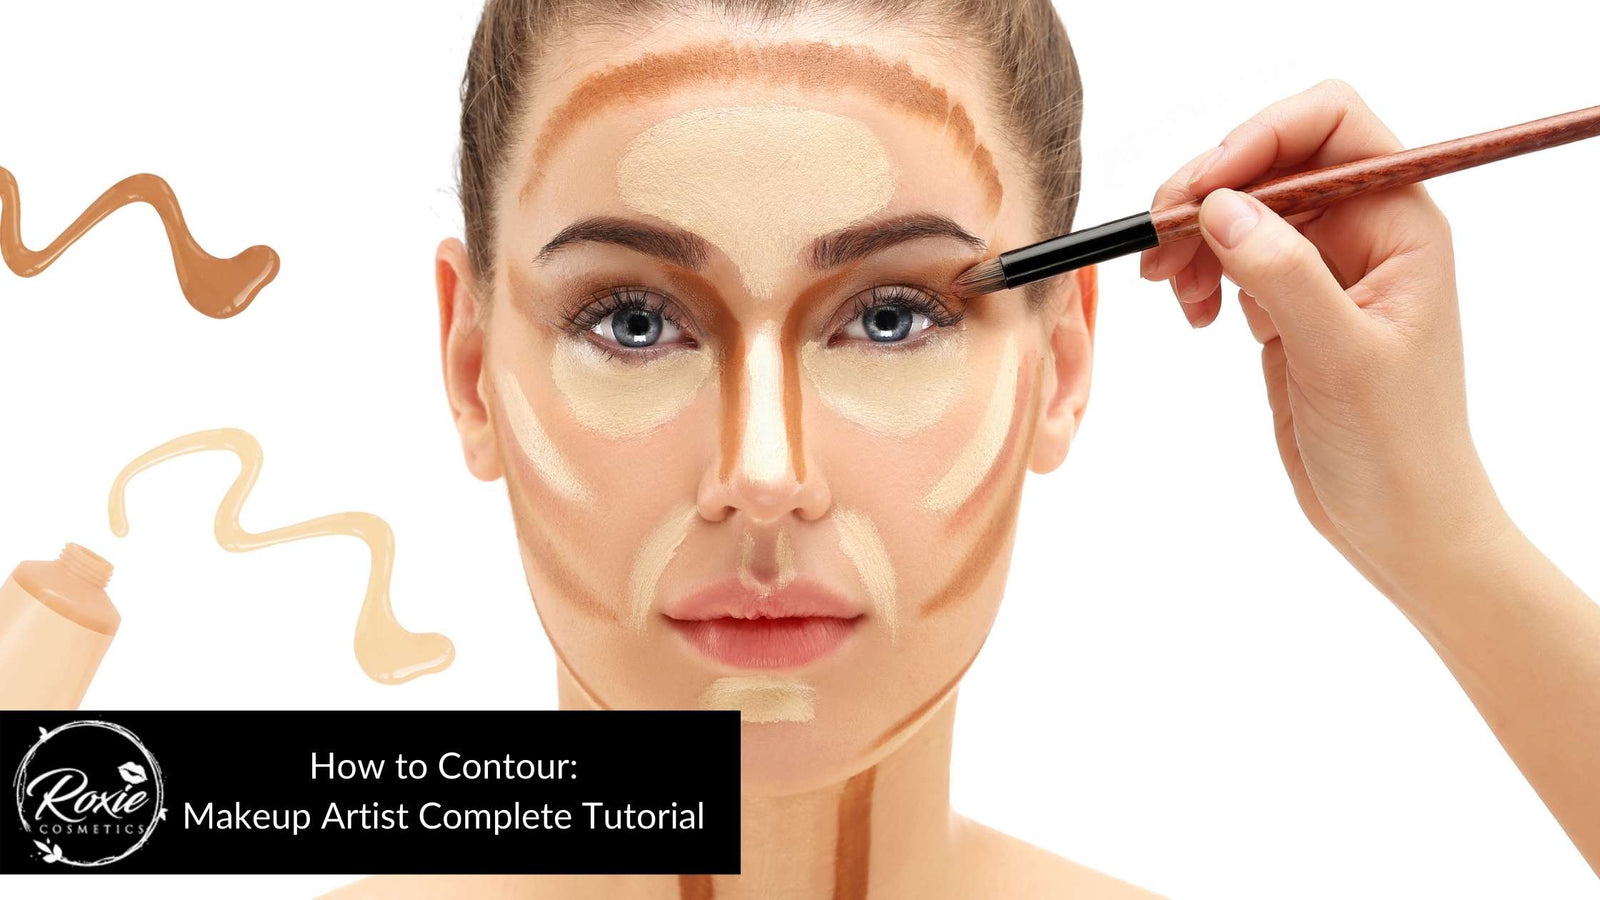 How to Contour: A Complete Tutorial From a Makeup Artist – Roxie Cosmetics